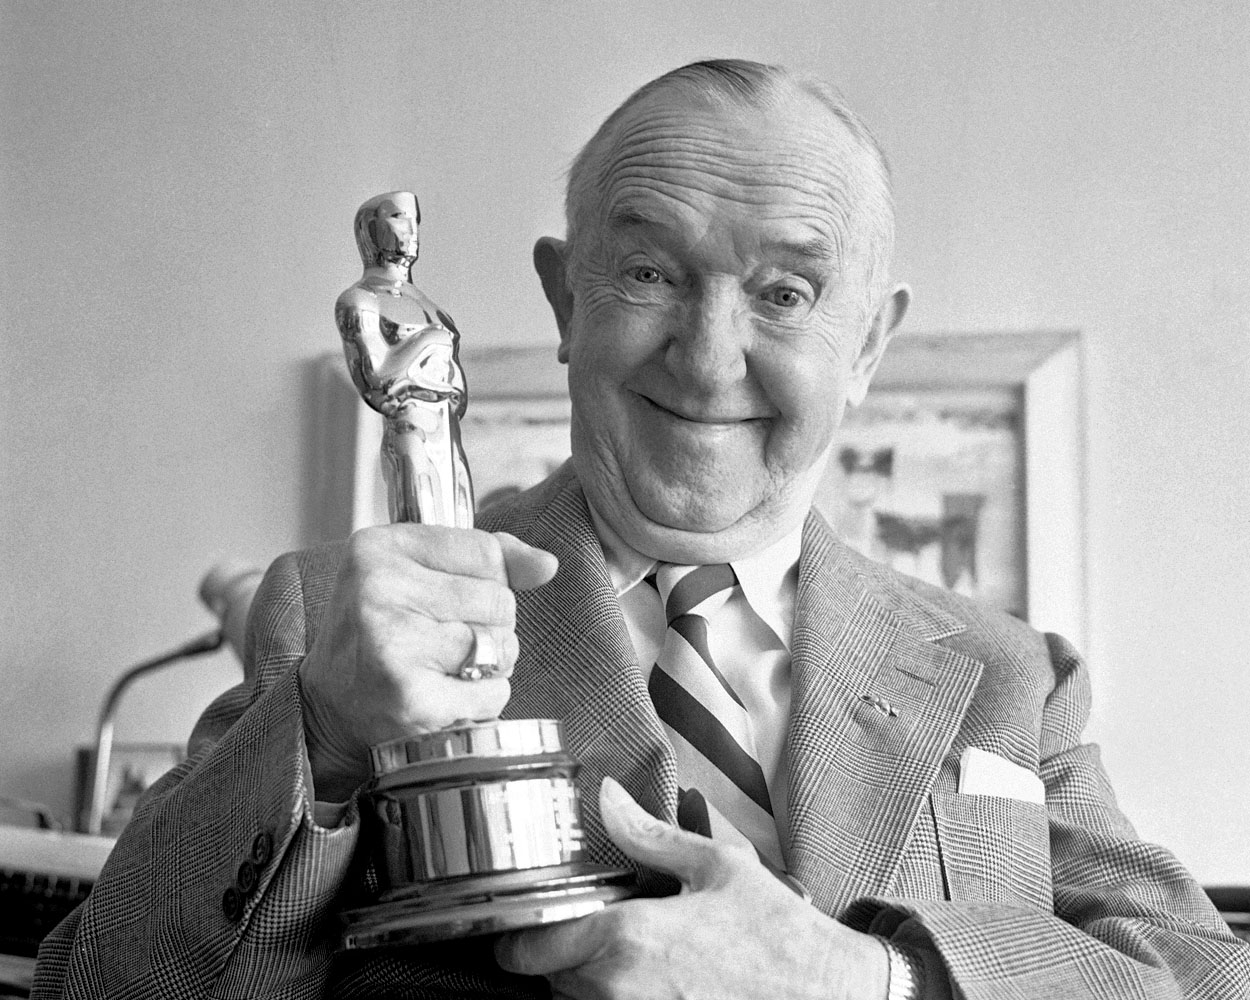 Stan with his Oscar, a.k.a. “Mr. Clean”